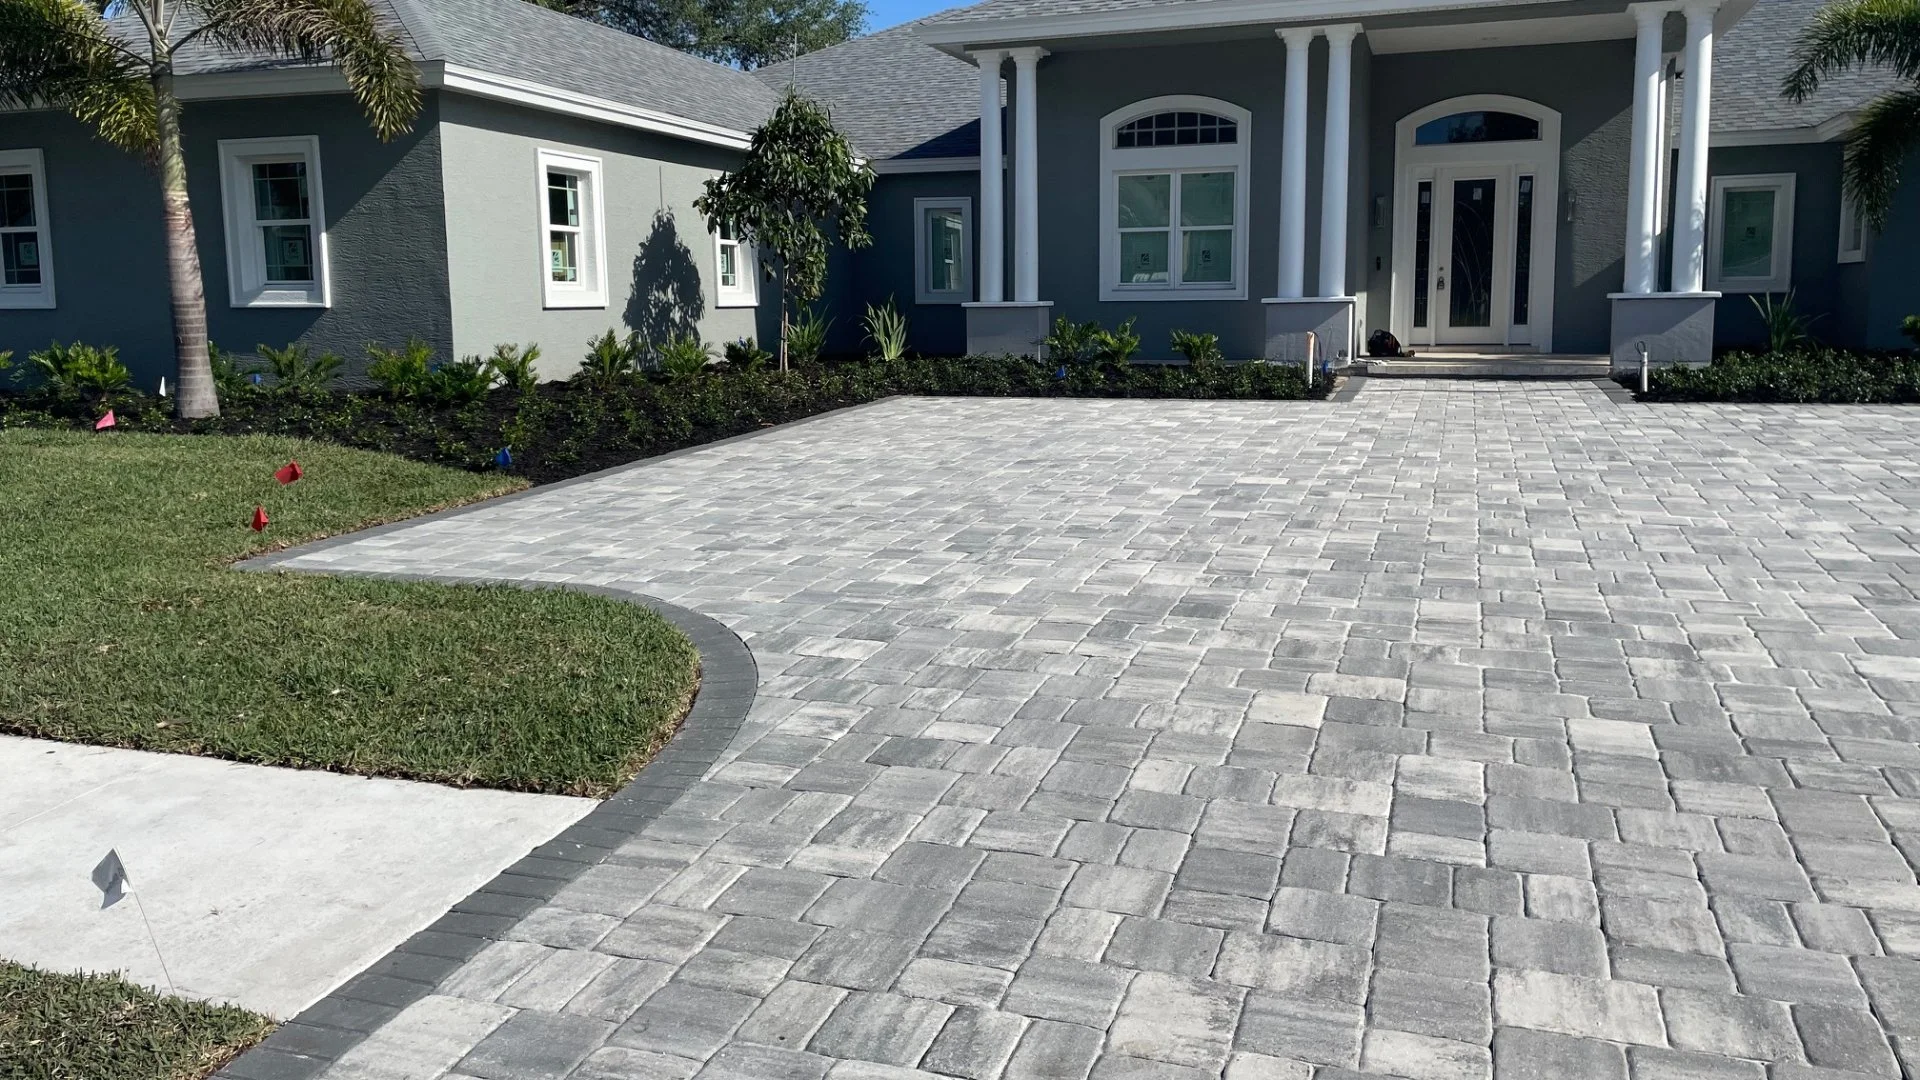 Landscaping & Paver Installation Project in Winter Haven, FL